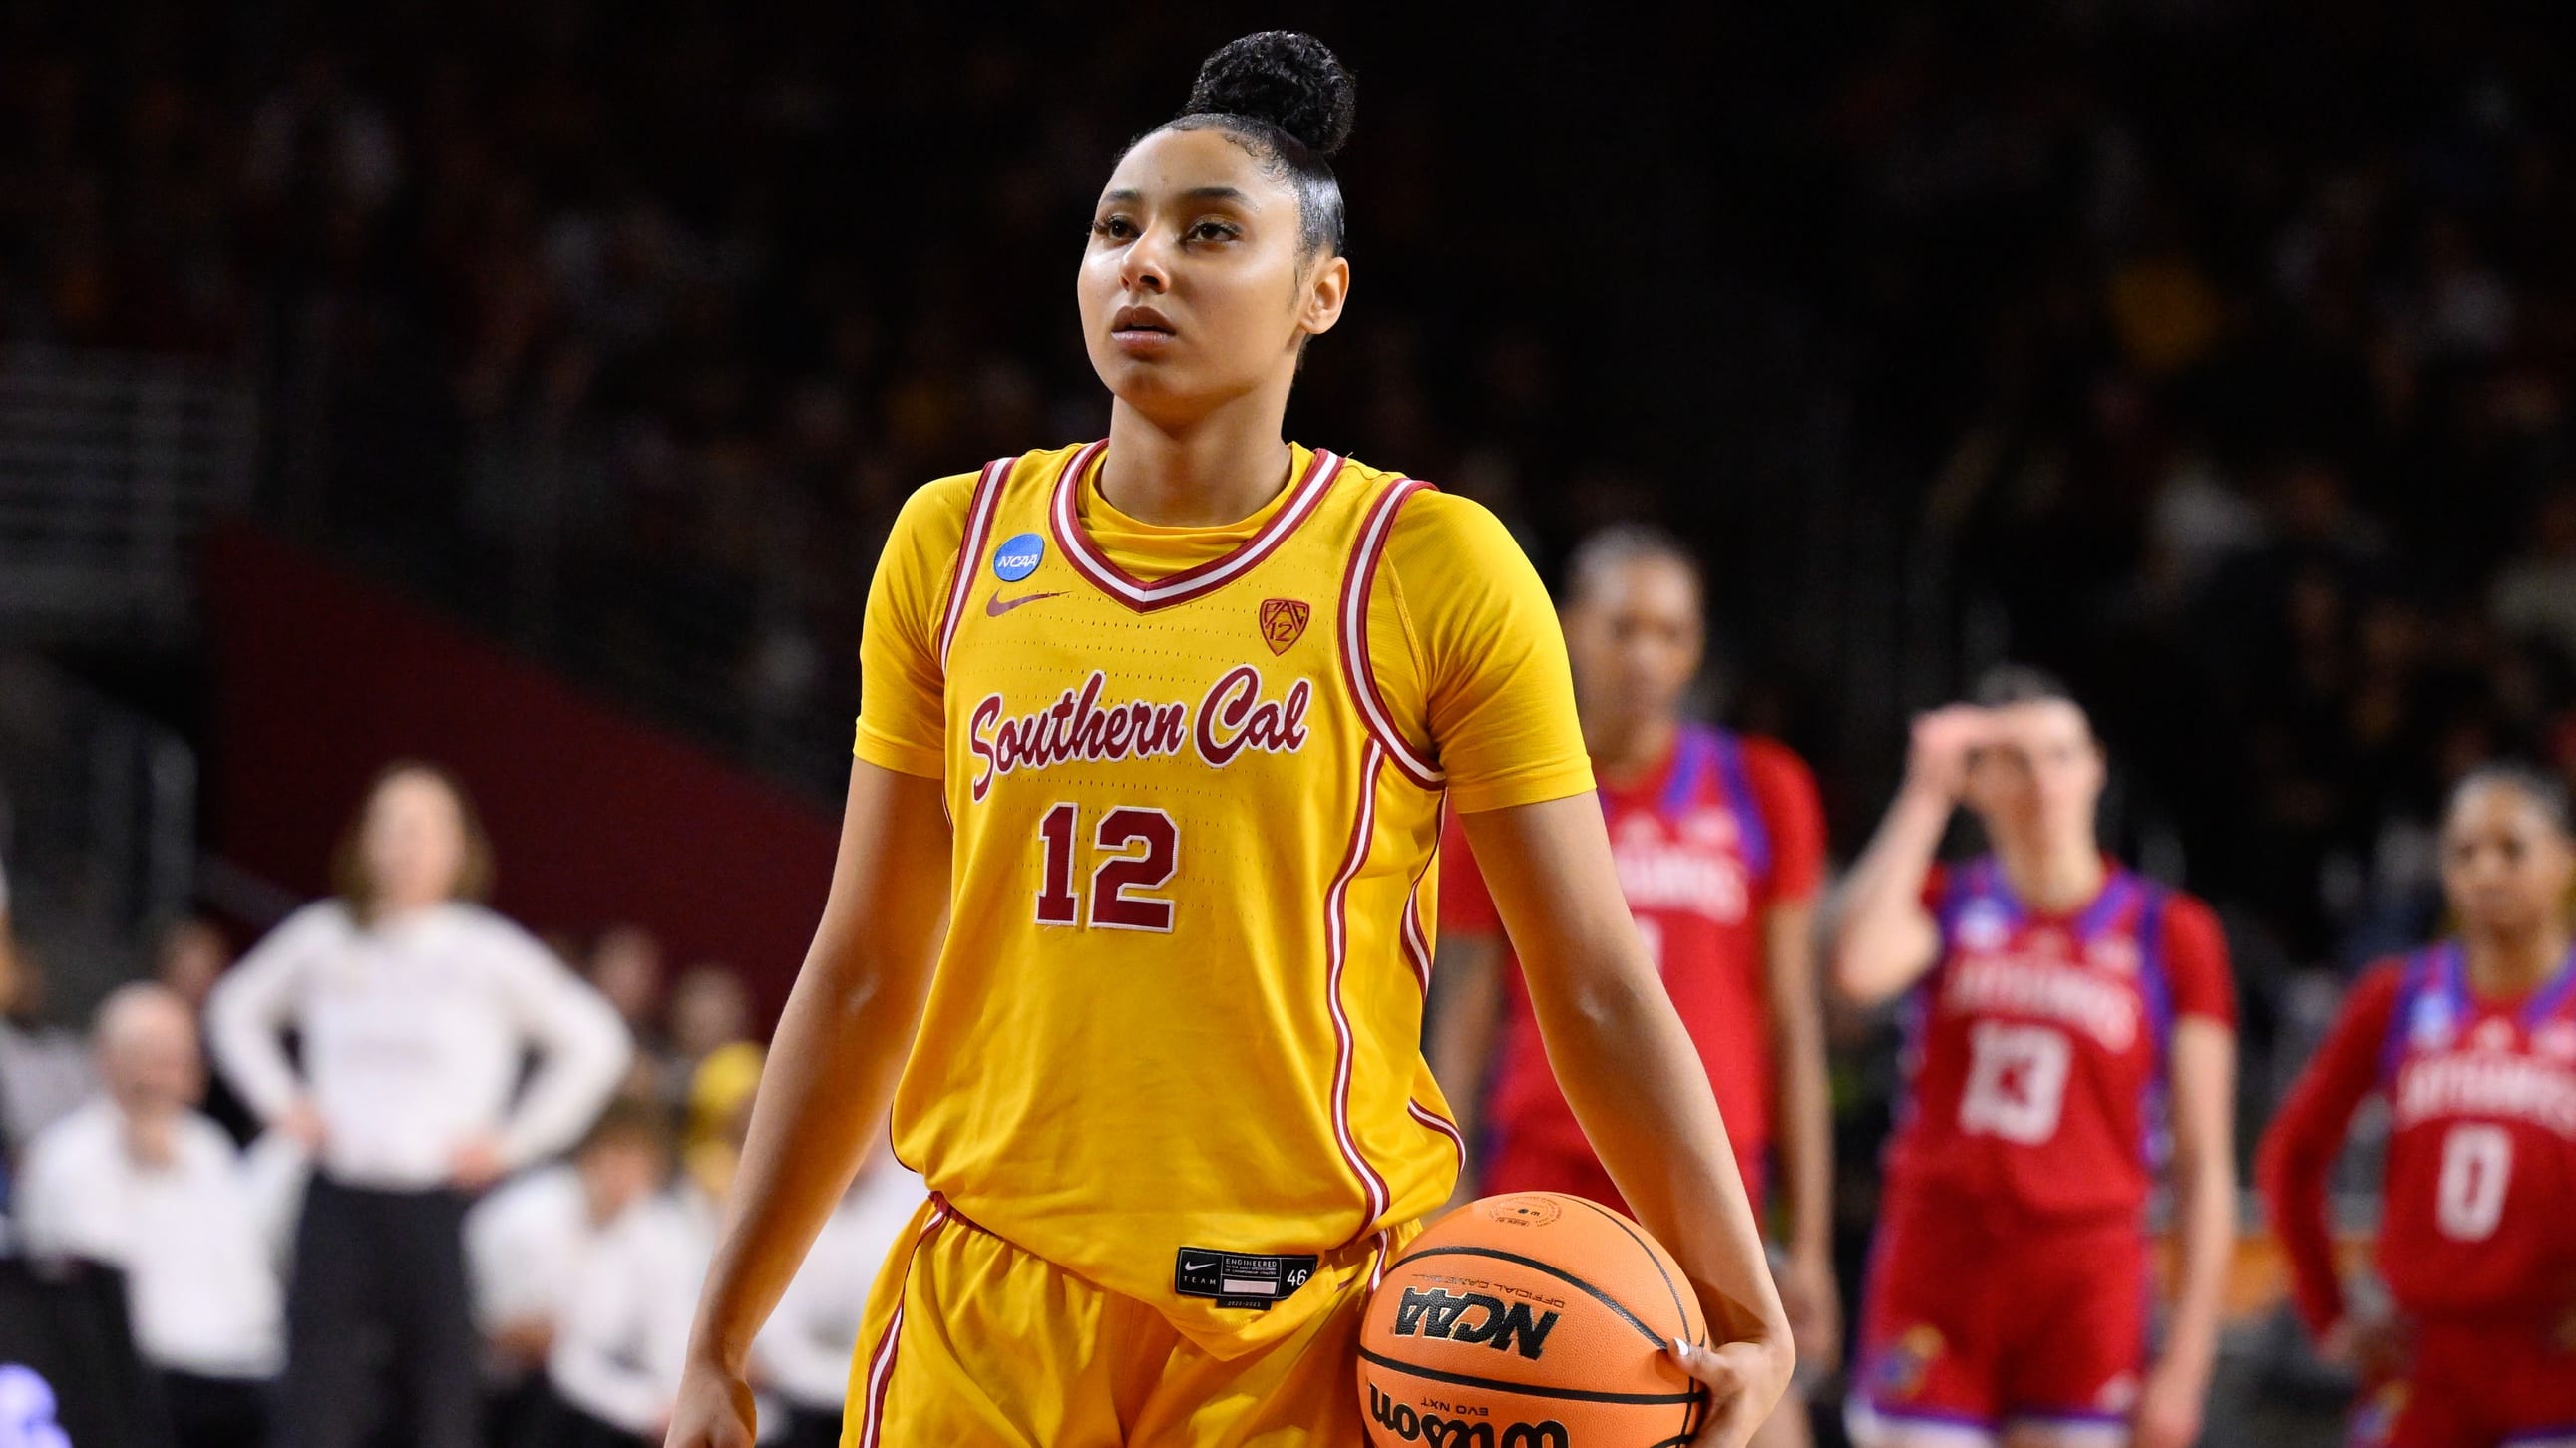 USC Women’s Basketball Wins Big At Tommy Awards